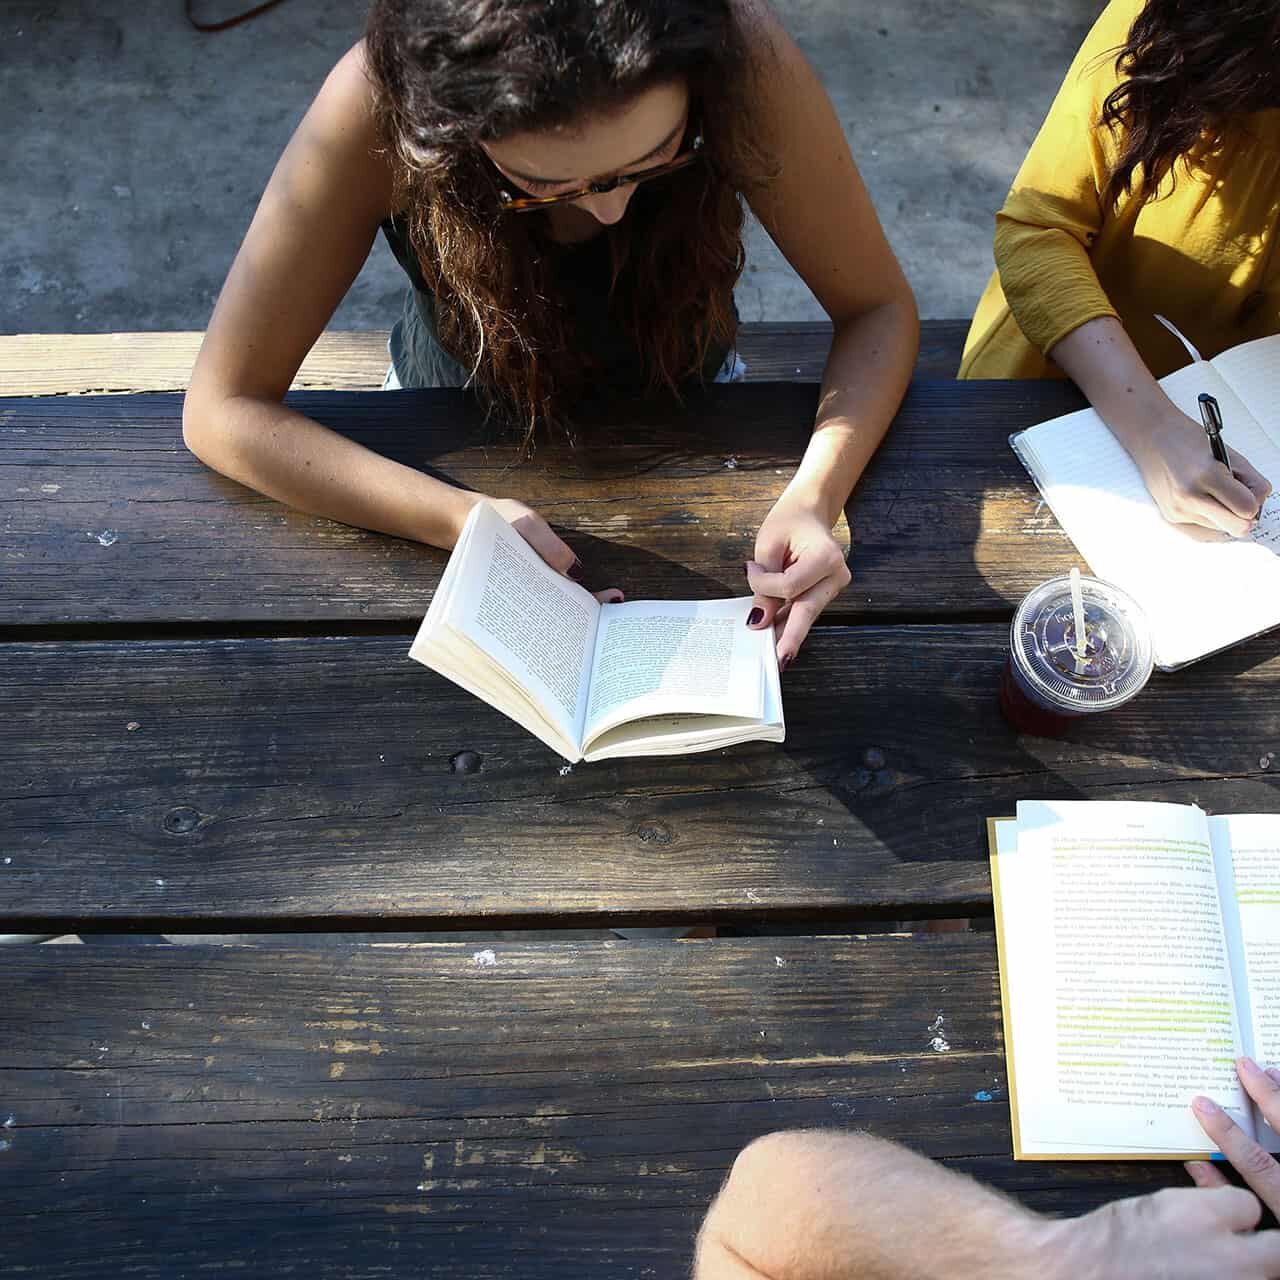 A group of friends reading and studying together outdoors at a picnic table